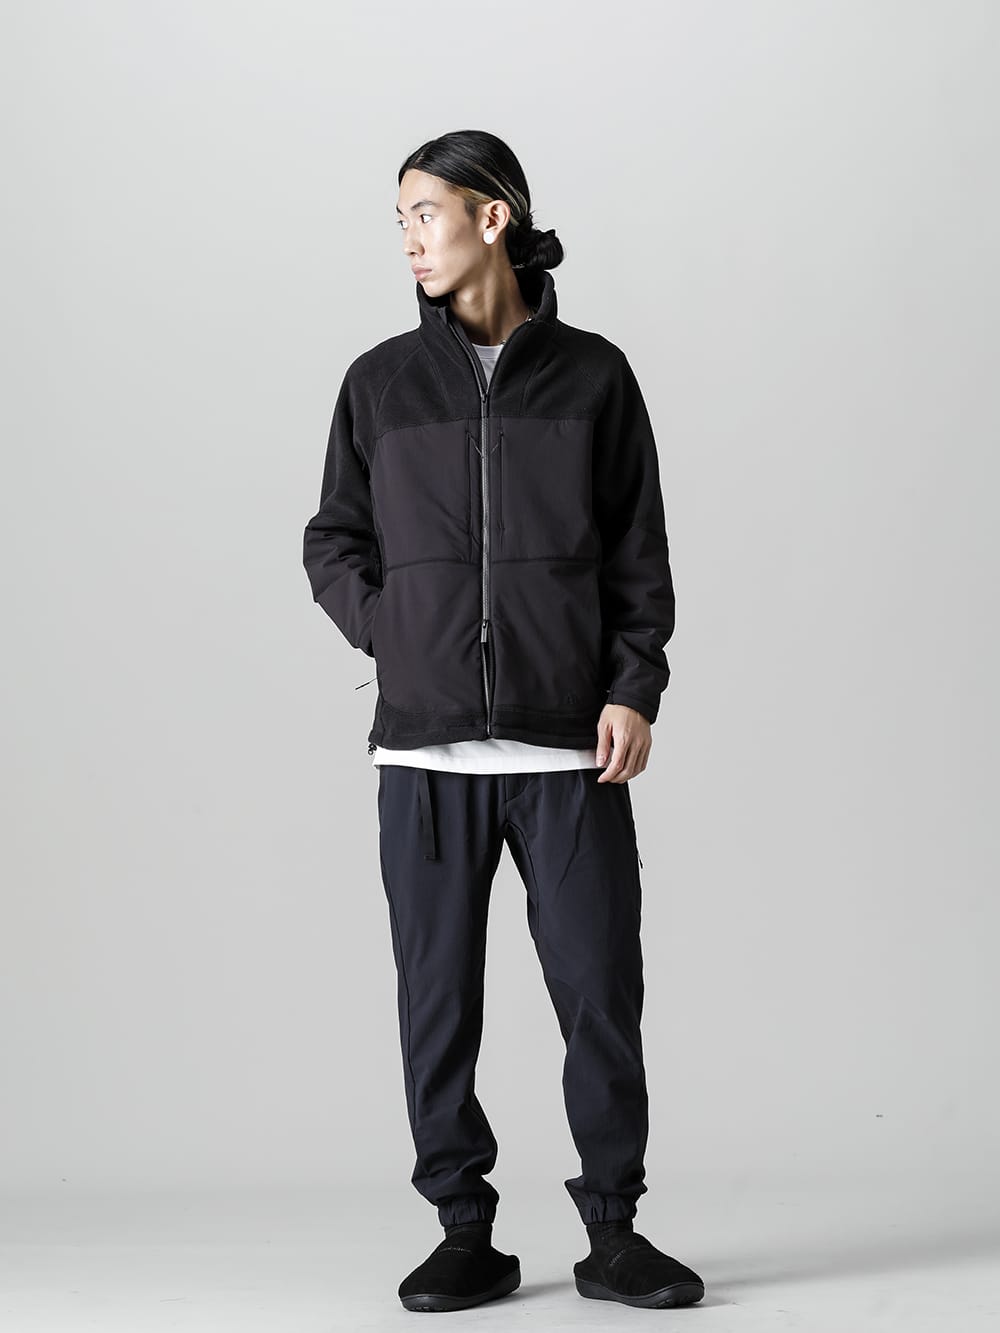 White Mountaineering ポーラテックフリースZIPブルゾン ウィンター 